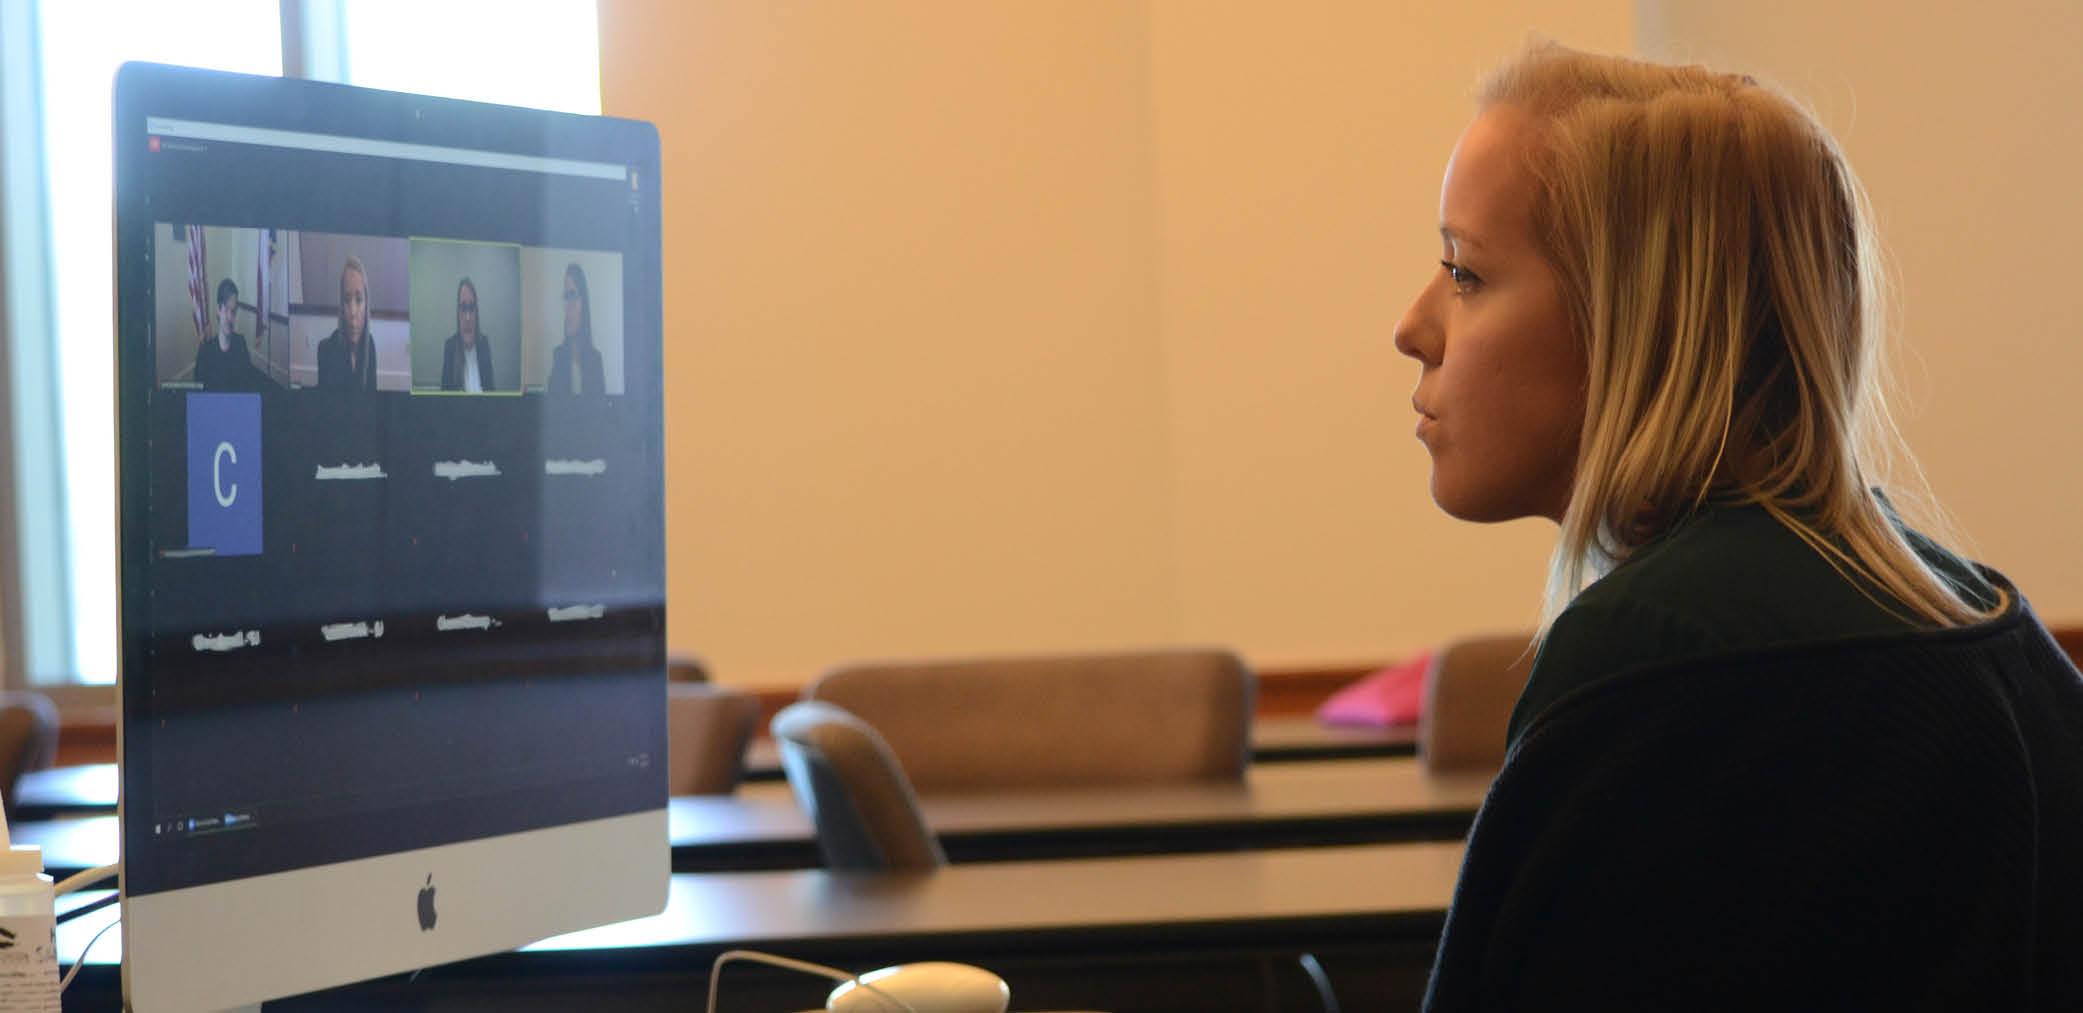 Student looks at computer screen, watching conference call